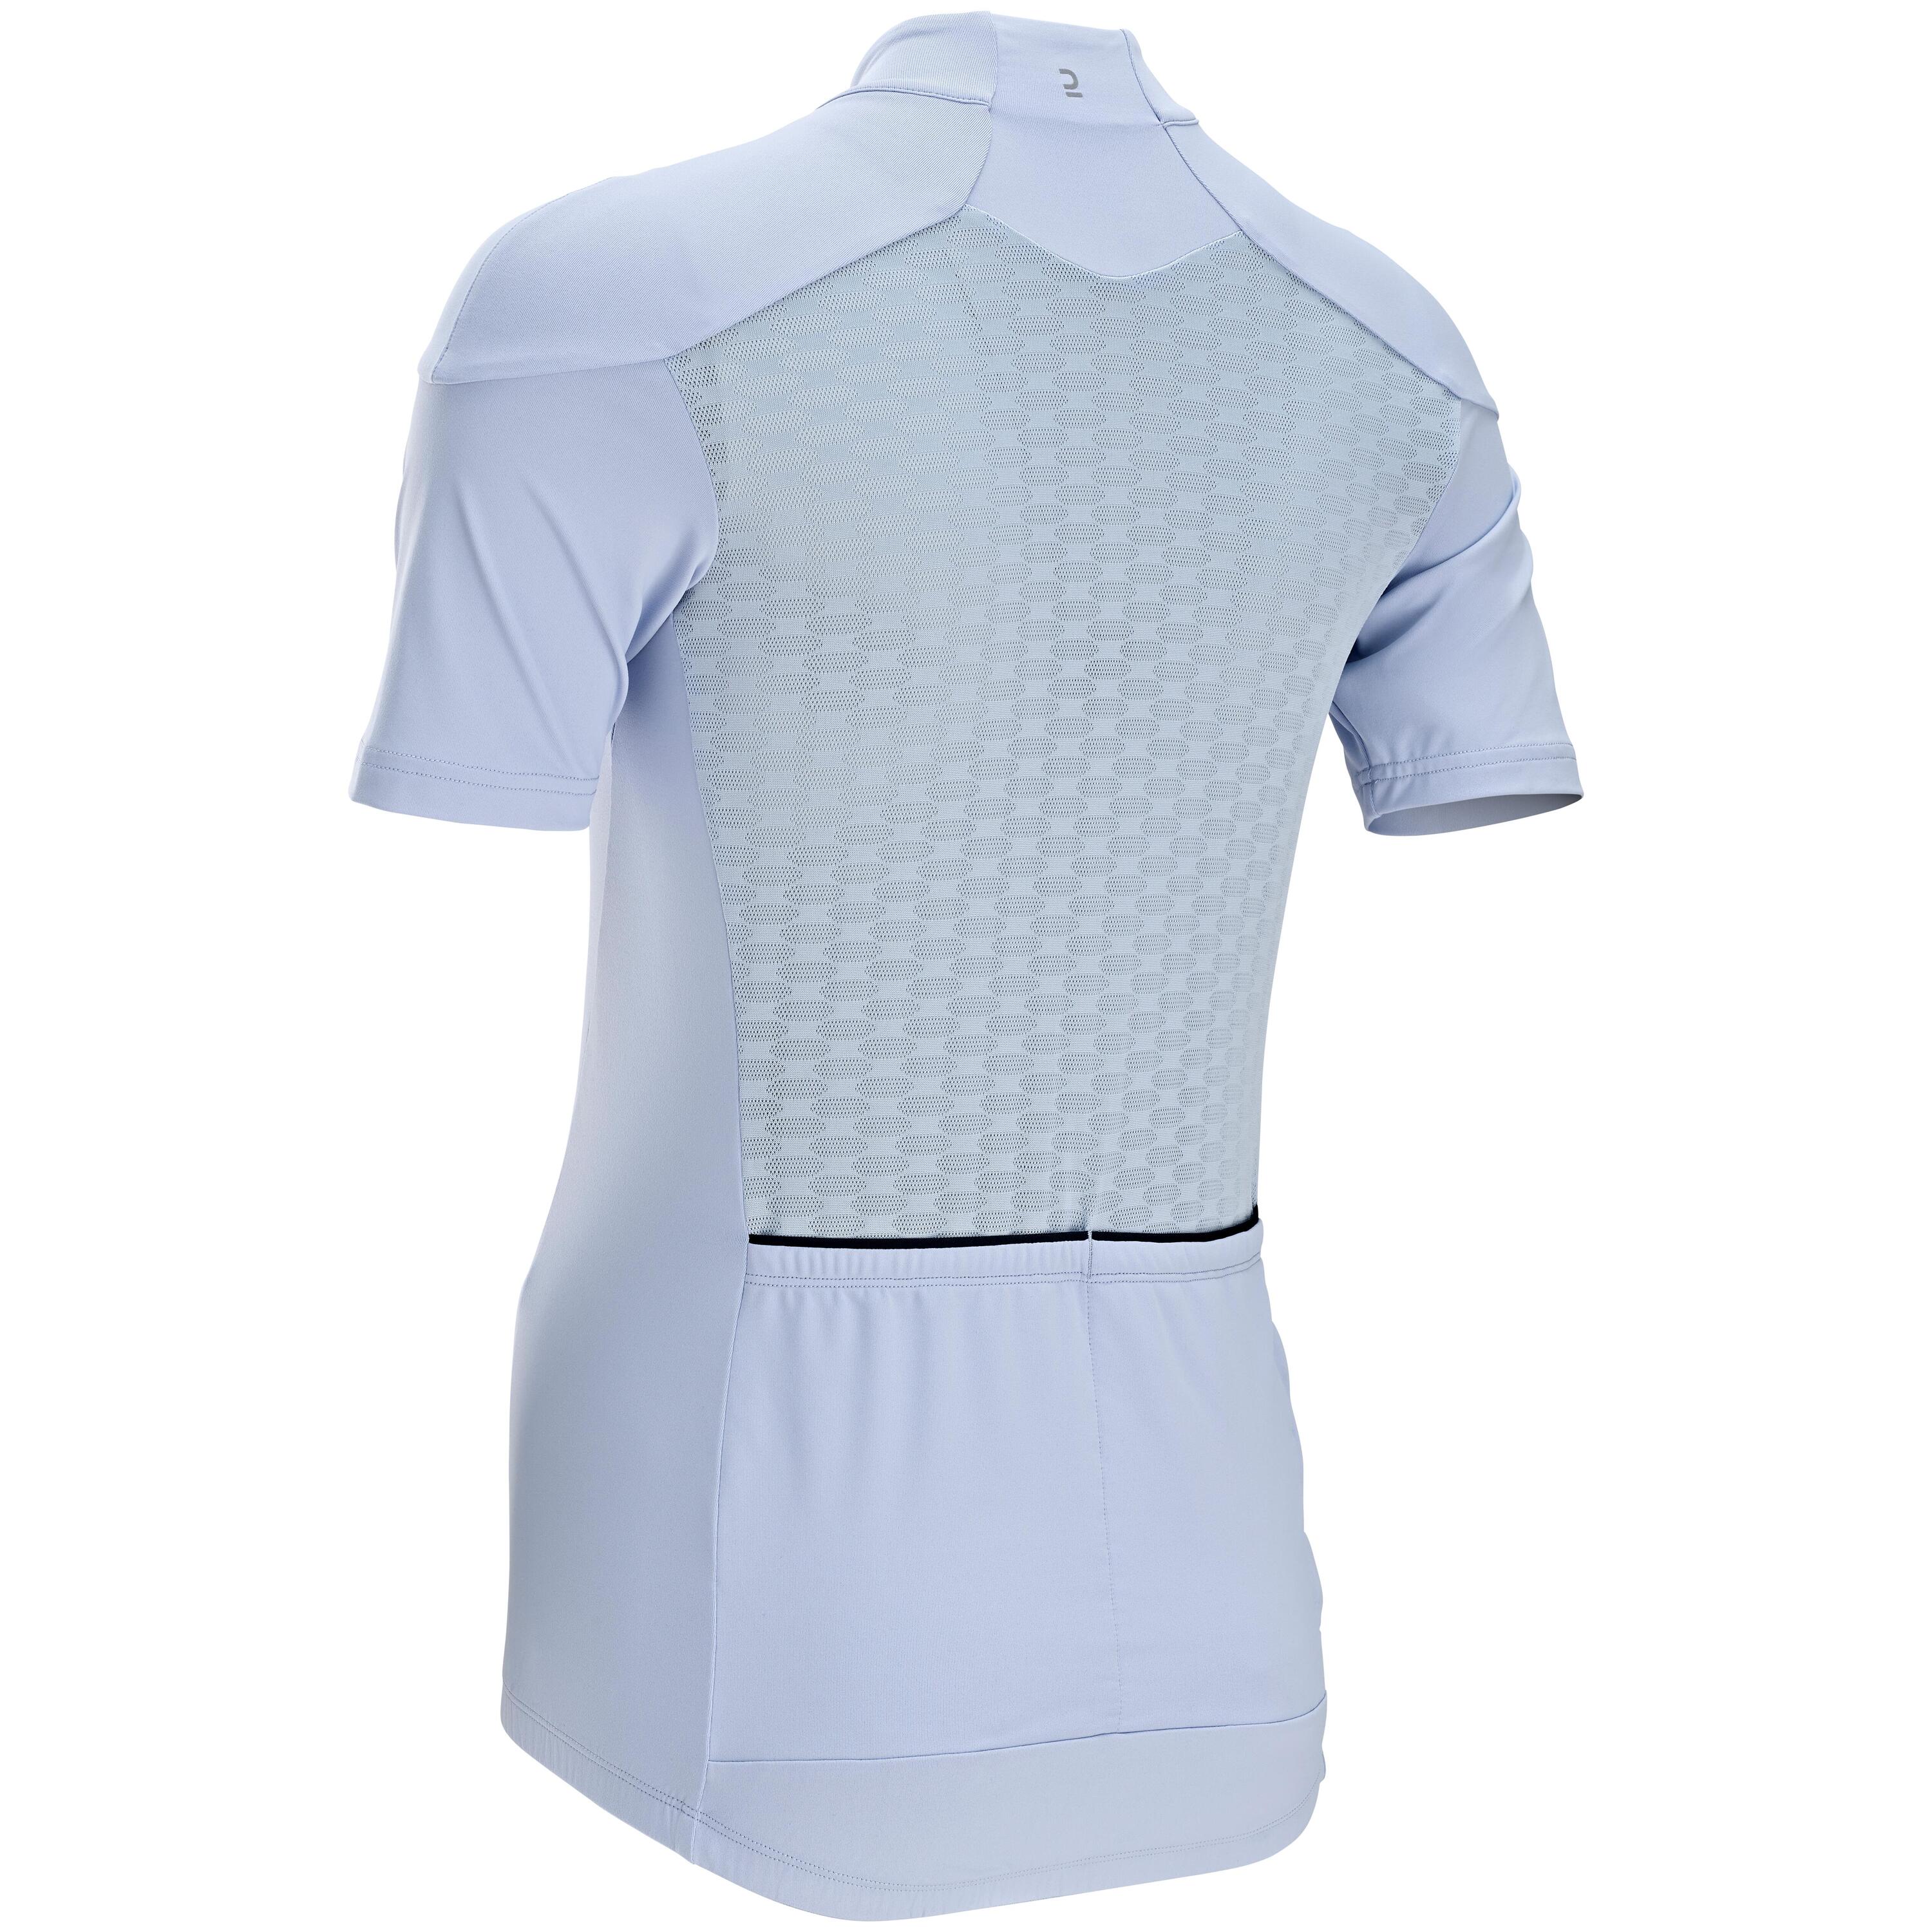 Women's Short-Sleeved Road Cycling Jersey RC500 - Lavender 2/6